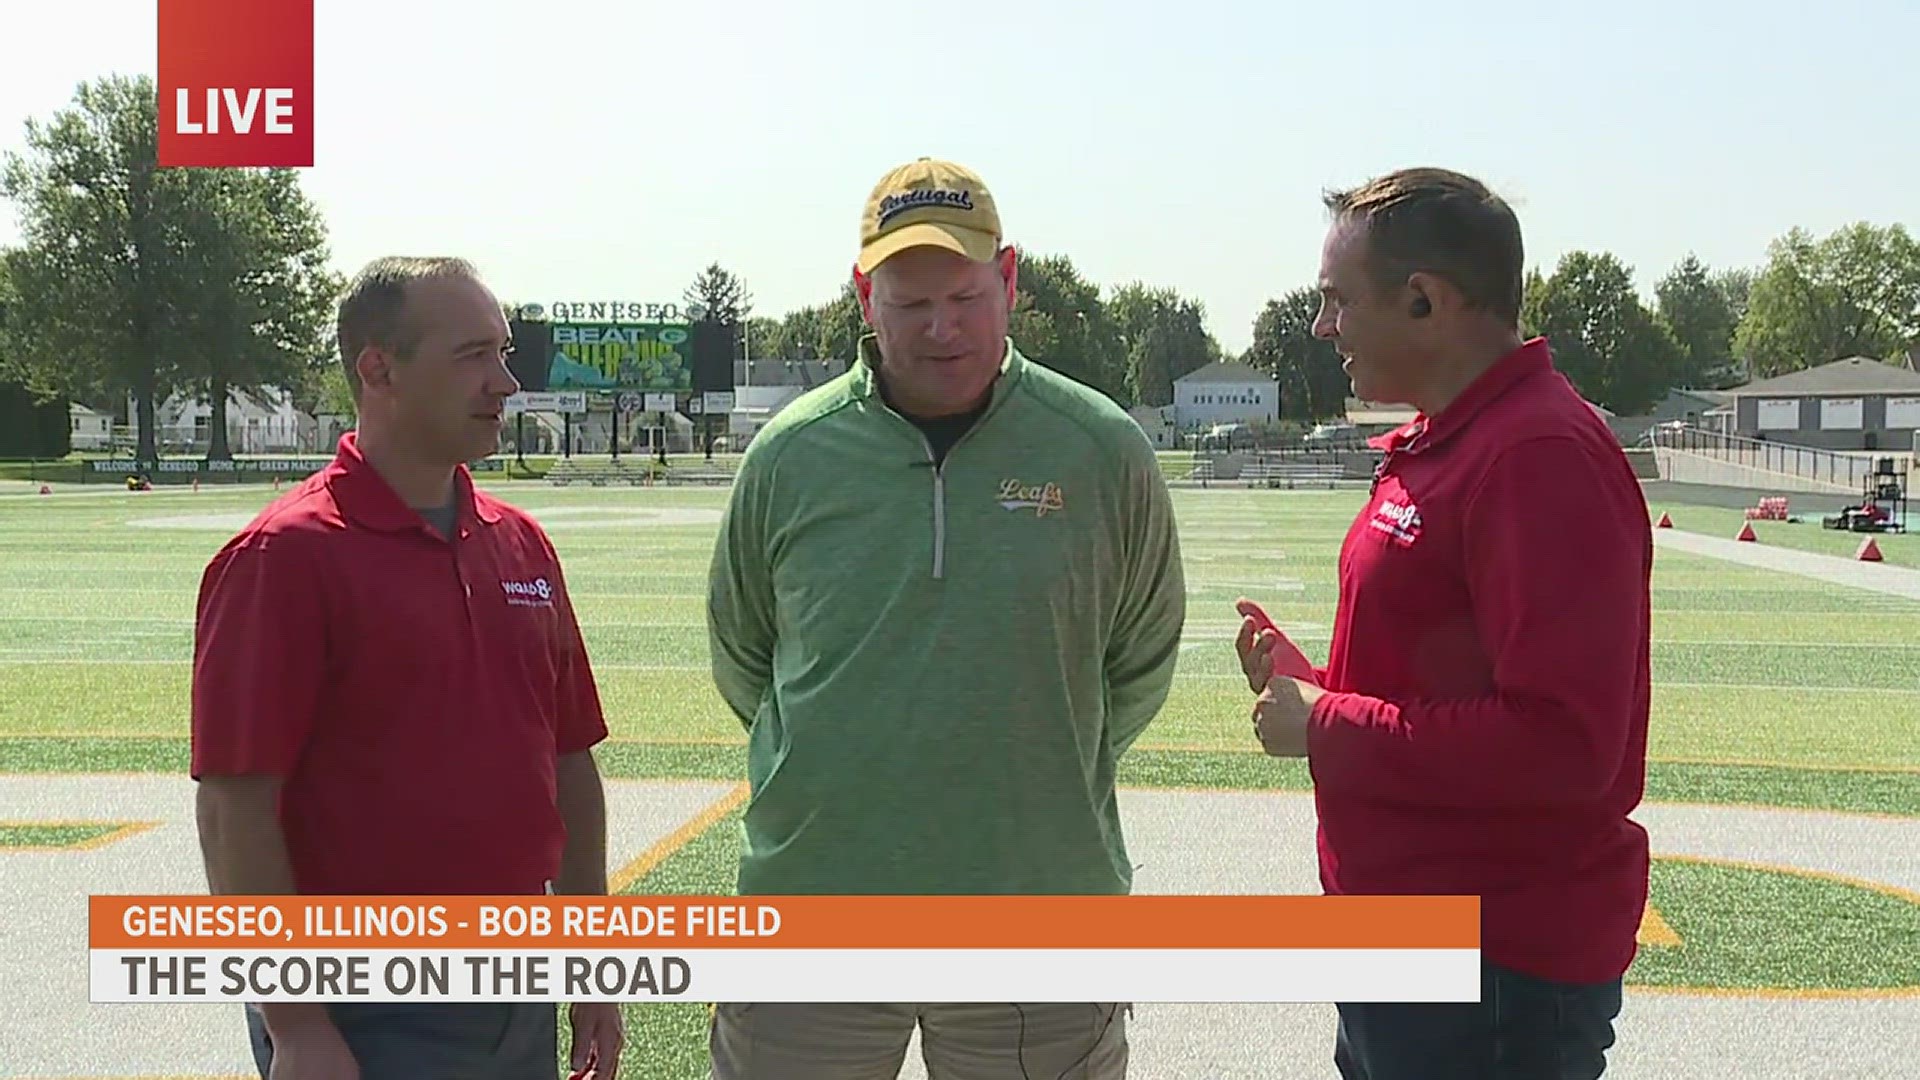 News 8 reporters are live in Geneseo with Larry Johnsen Jr. to talk about the rivalry, and why this upcoming game is special.